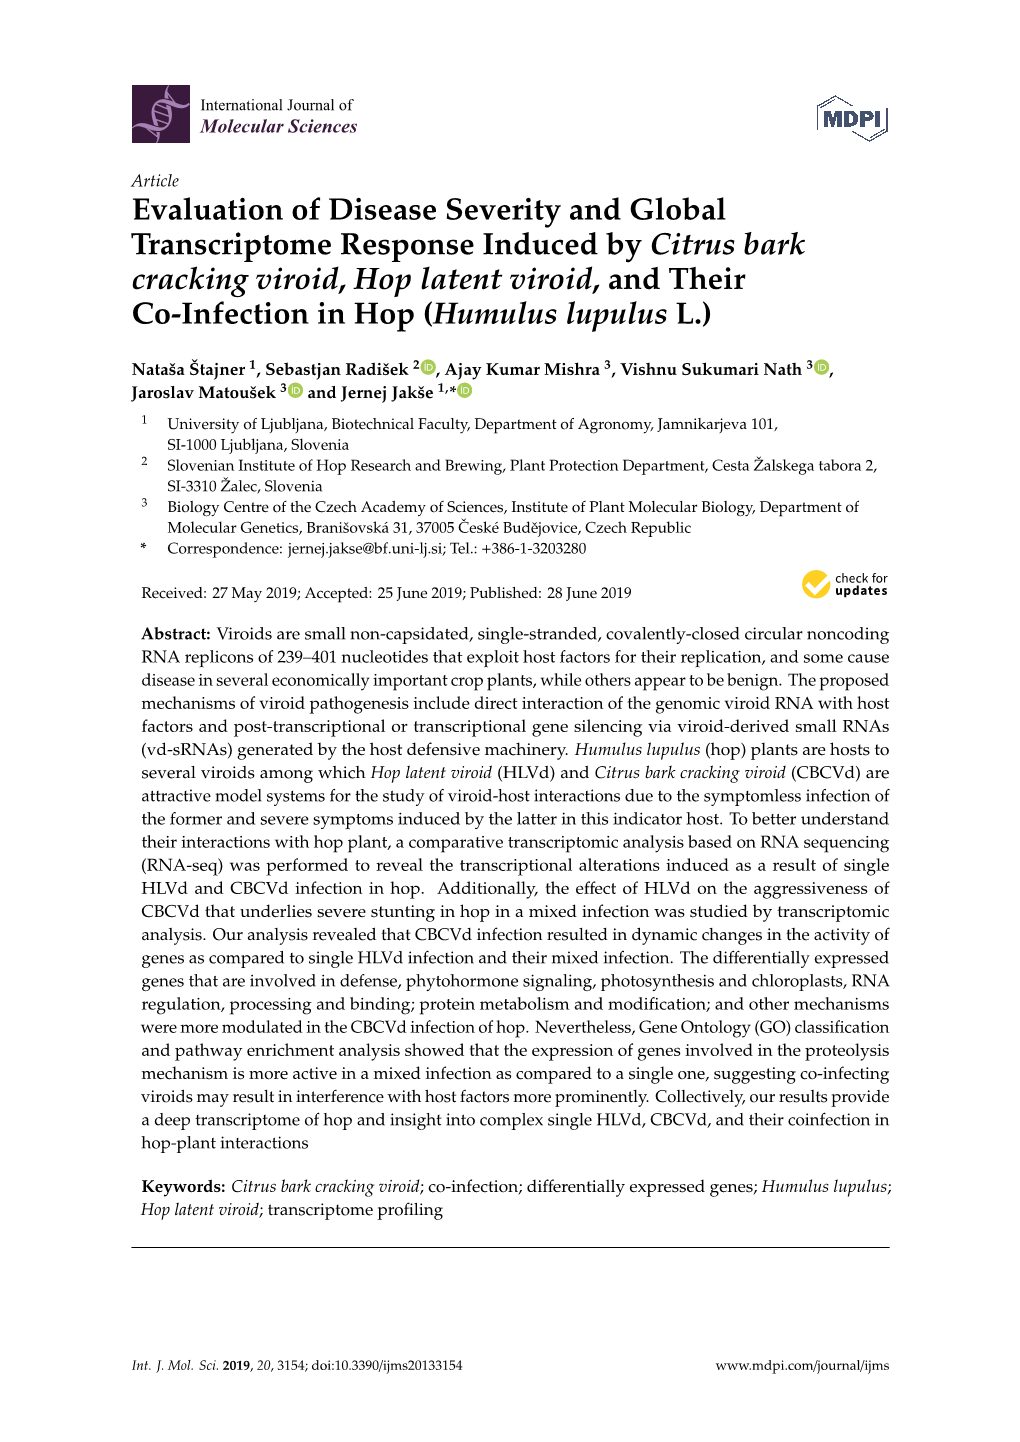 Evaluation of Disease Severity and Global Transcriptome Response Induced by Citrus Bark Cracking Viroid, Hop Latent Viroid